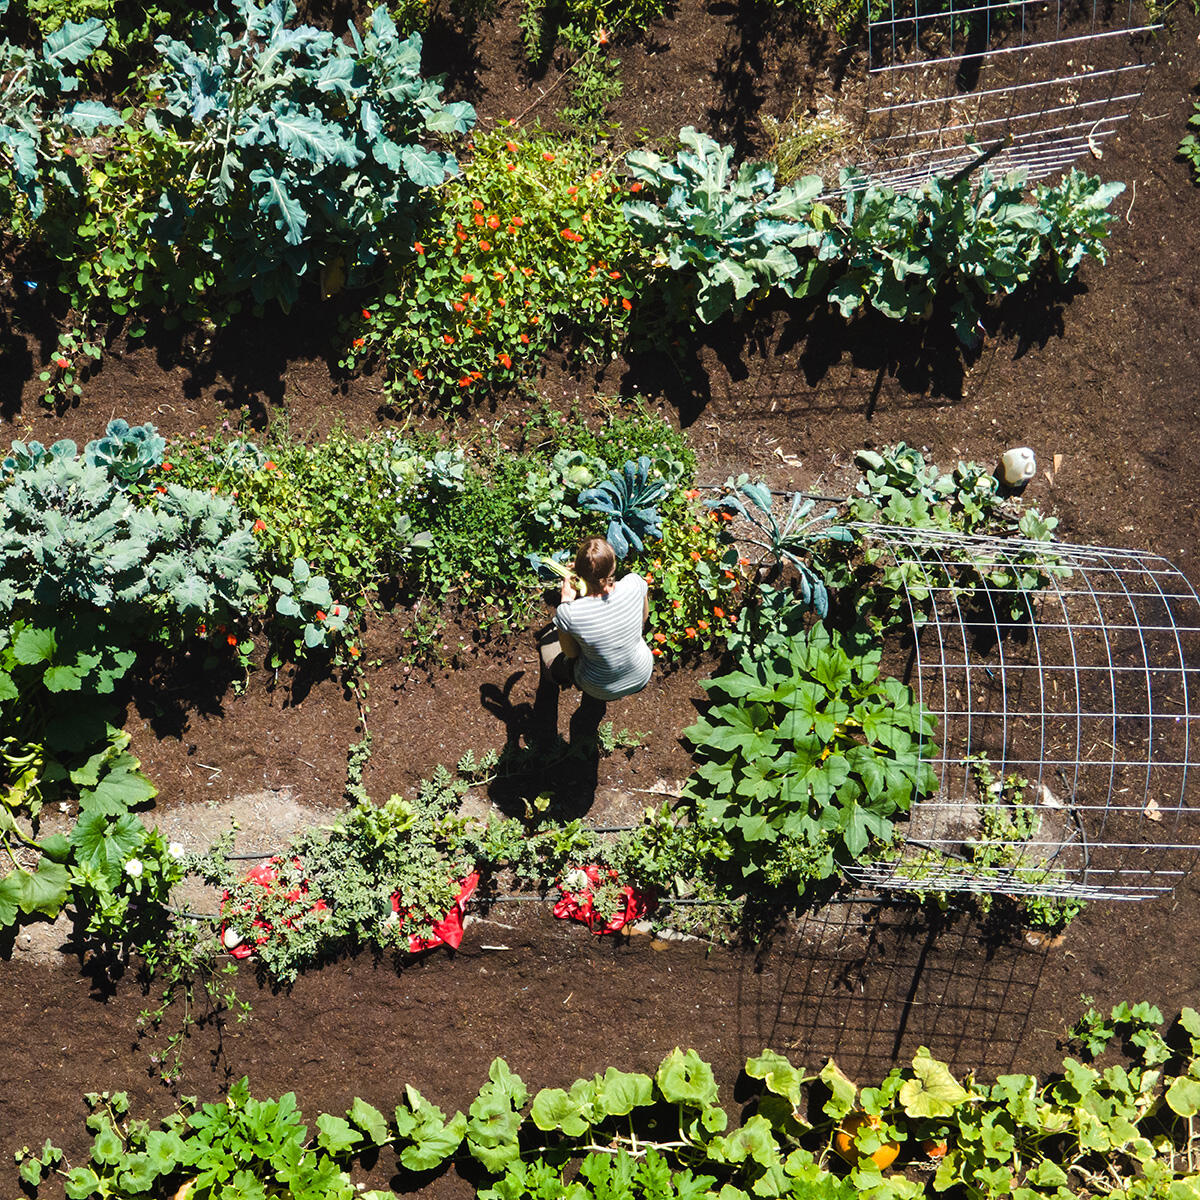 A woman works in garden rows, weeding and harvesting organic vegetable produce. View from high above.